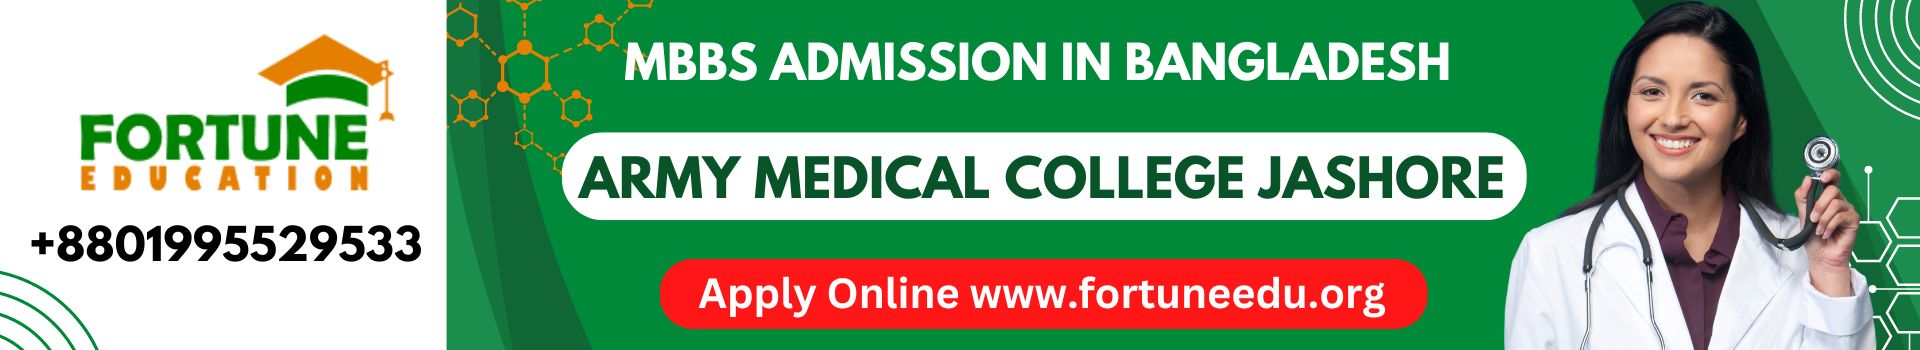 MBBS ADMISSION BY 1